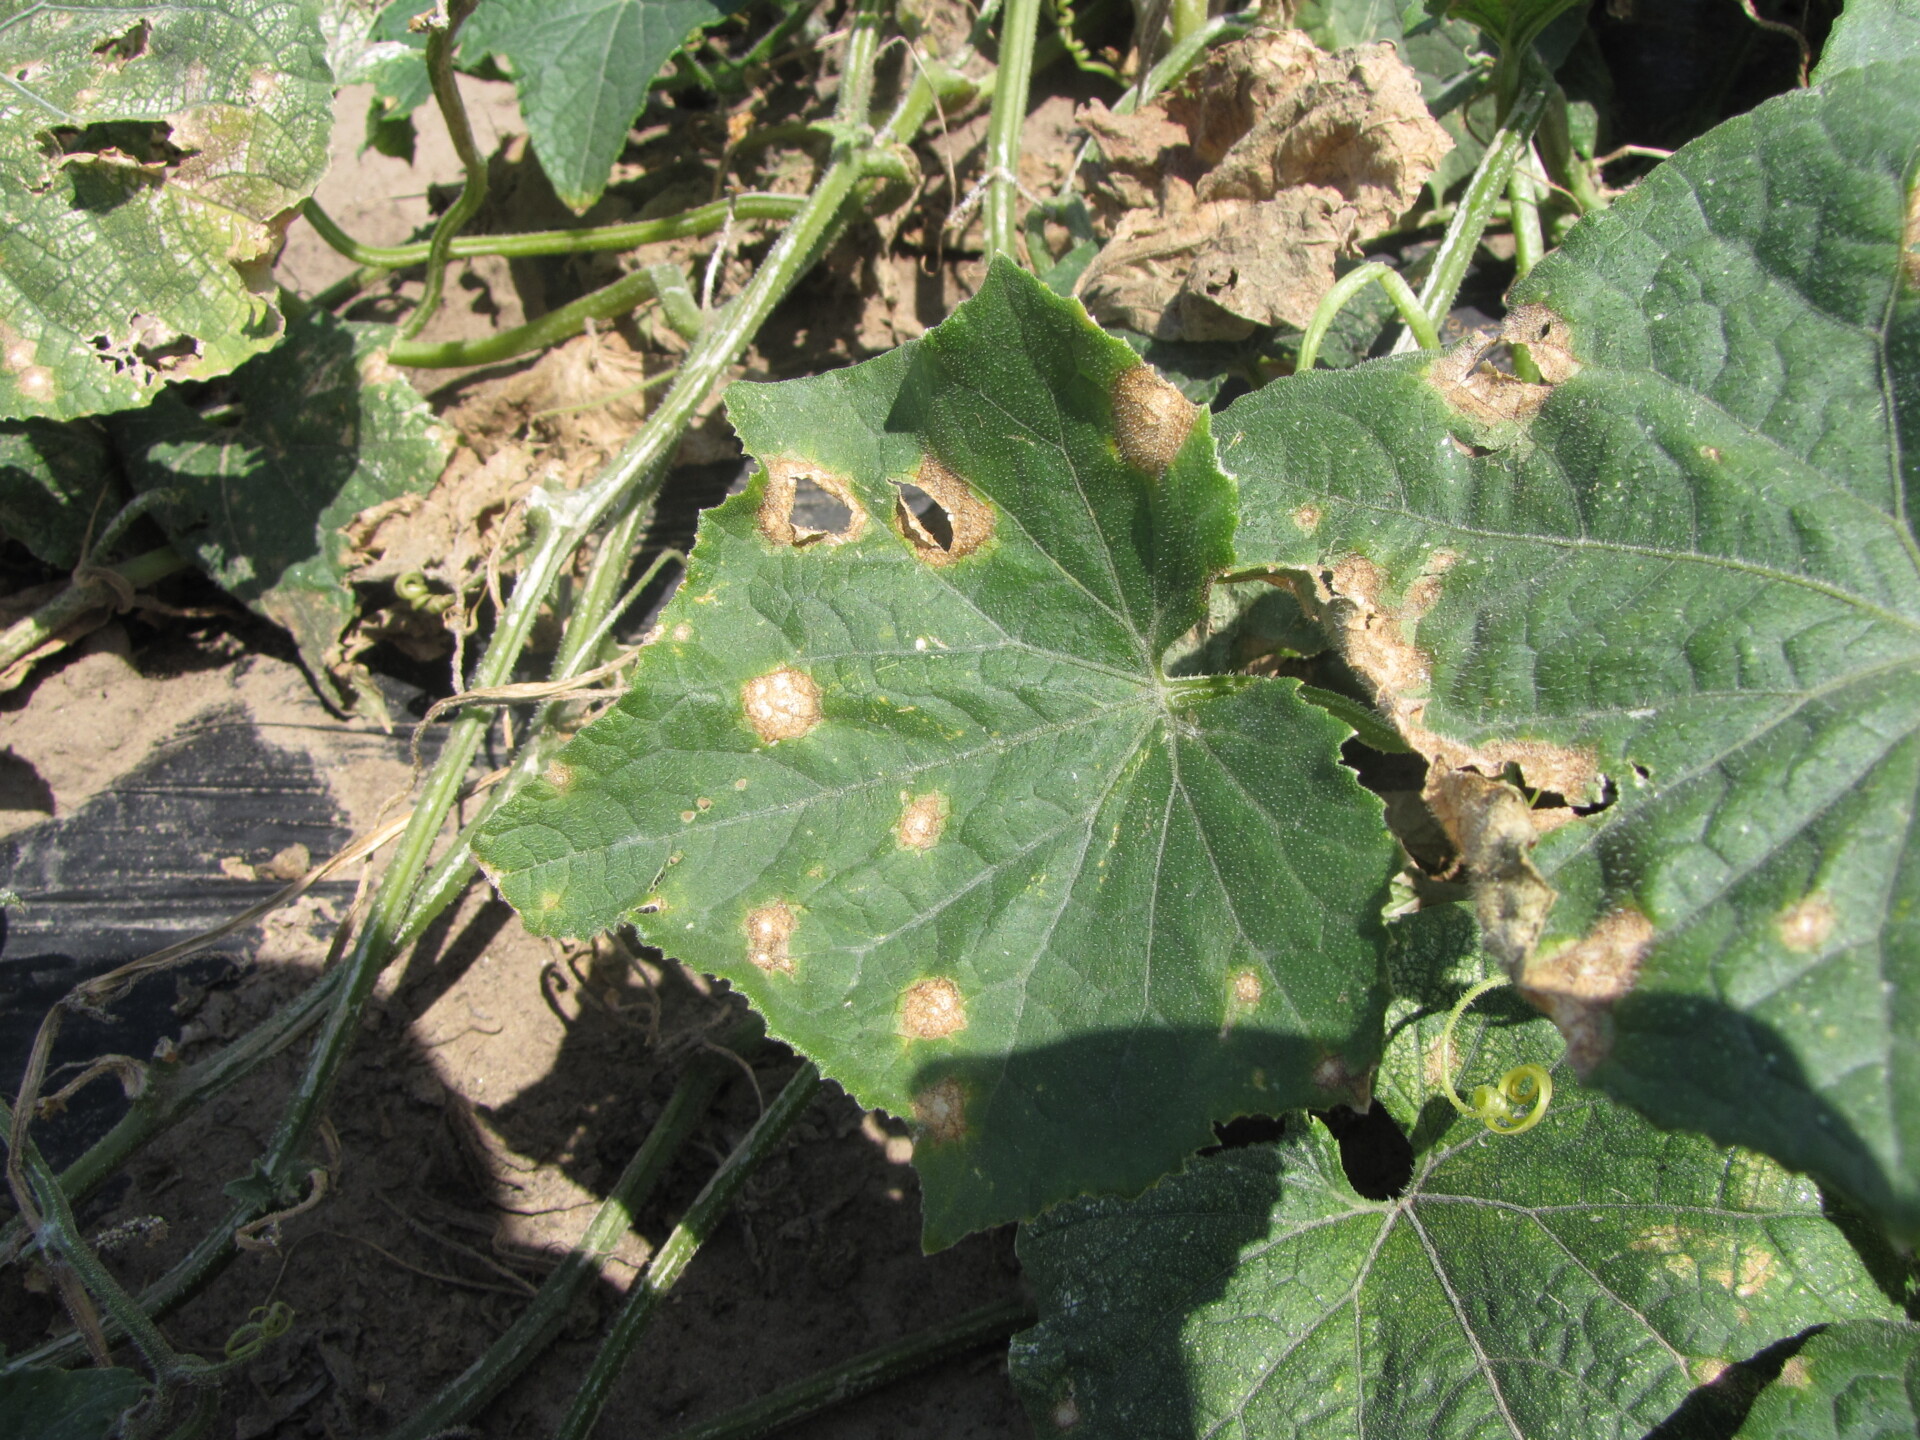 Anthracnose lesions on cucumber leaves.